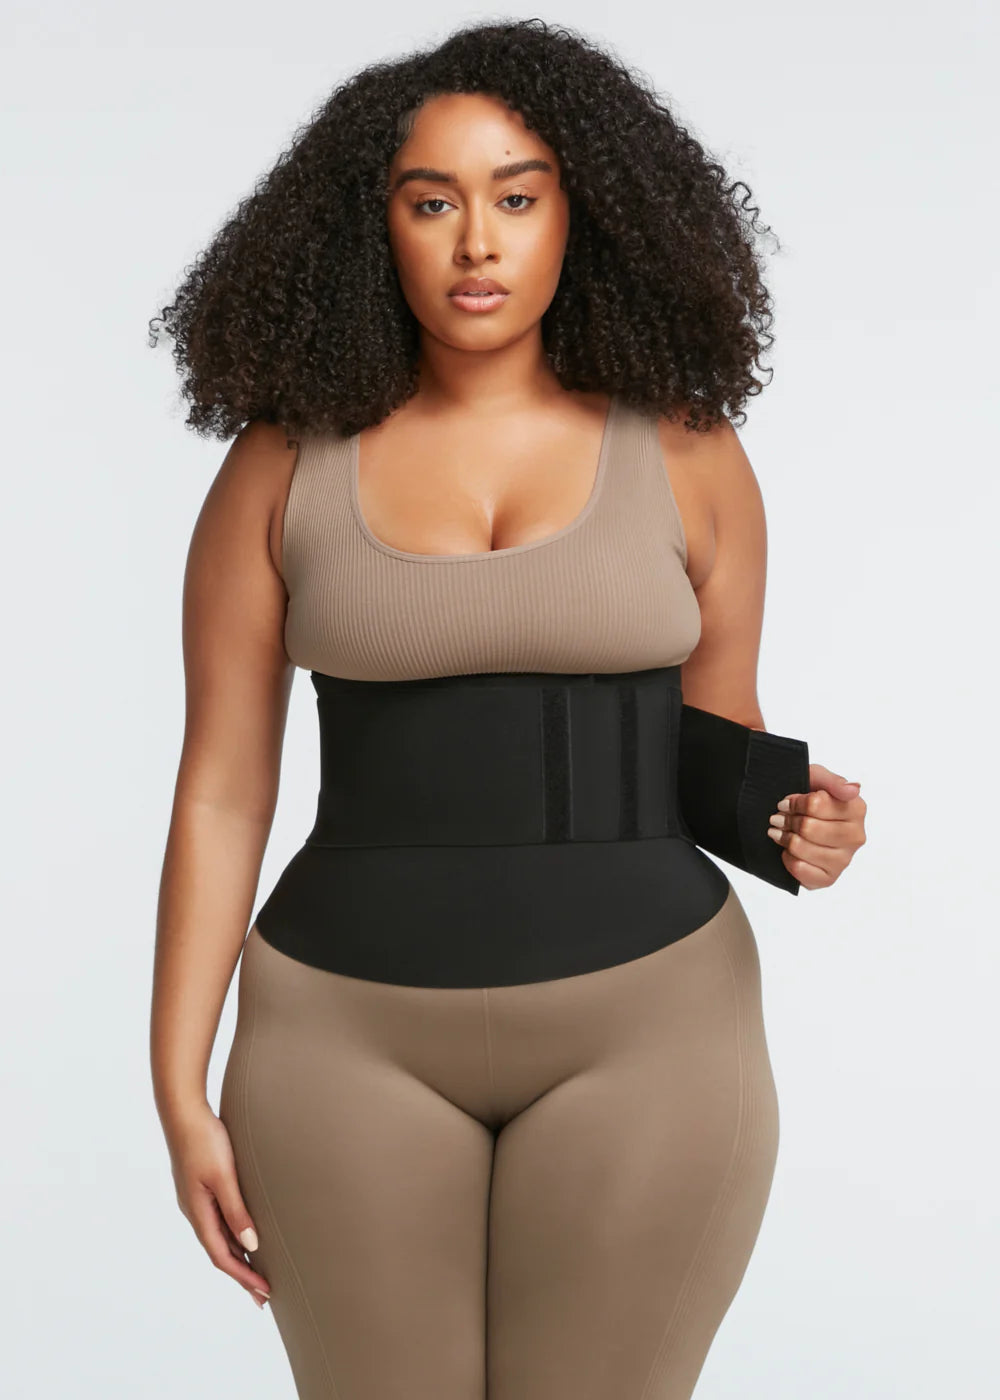 How To Know If Your Waist Trainer Fits Properly